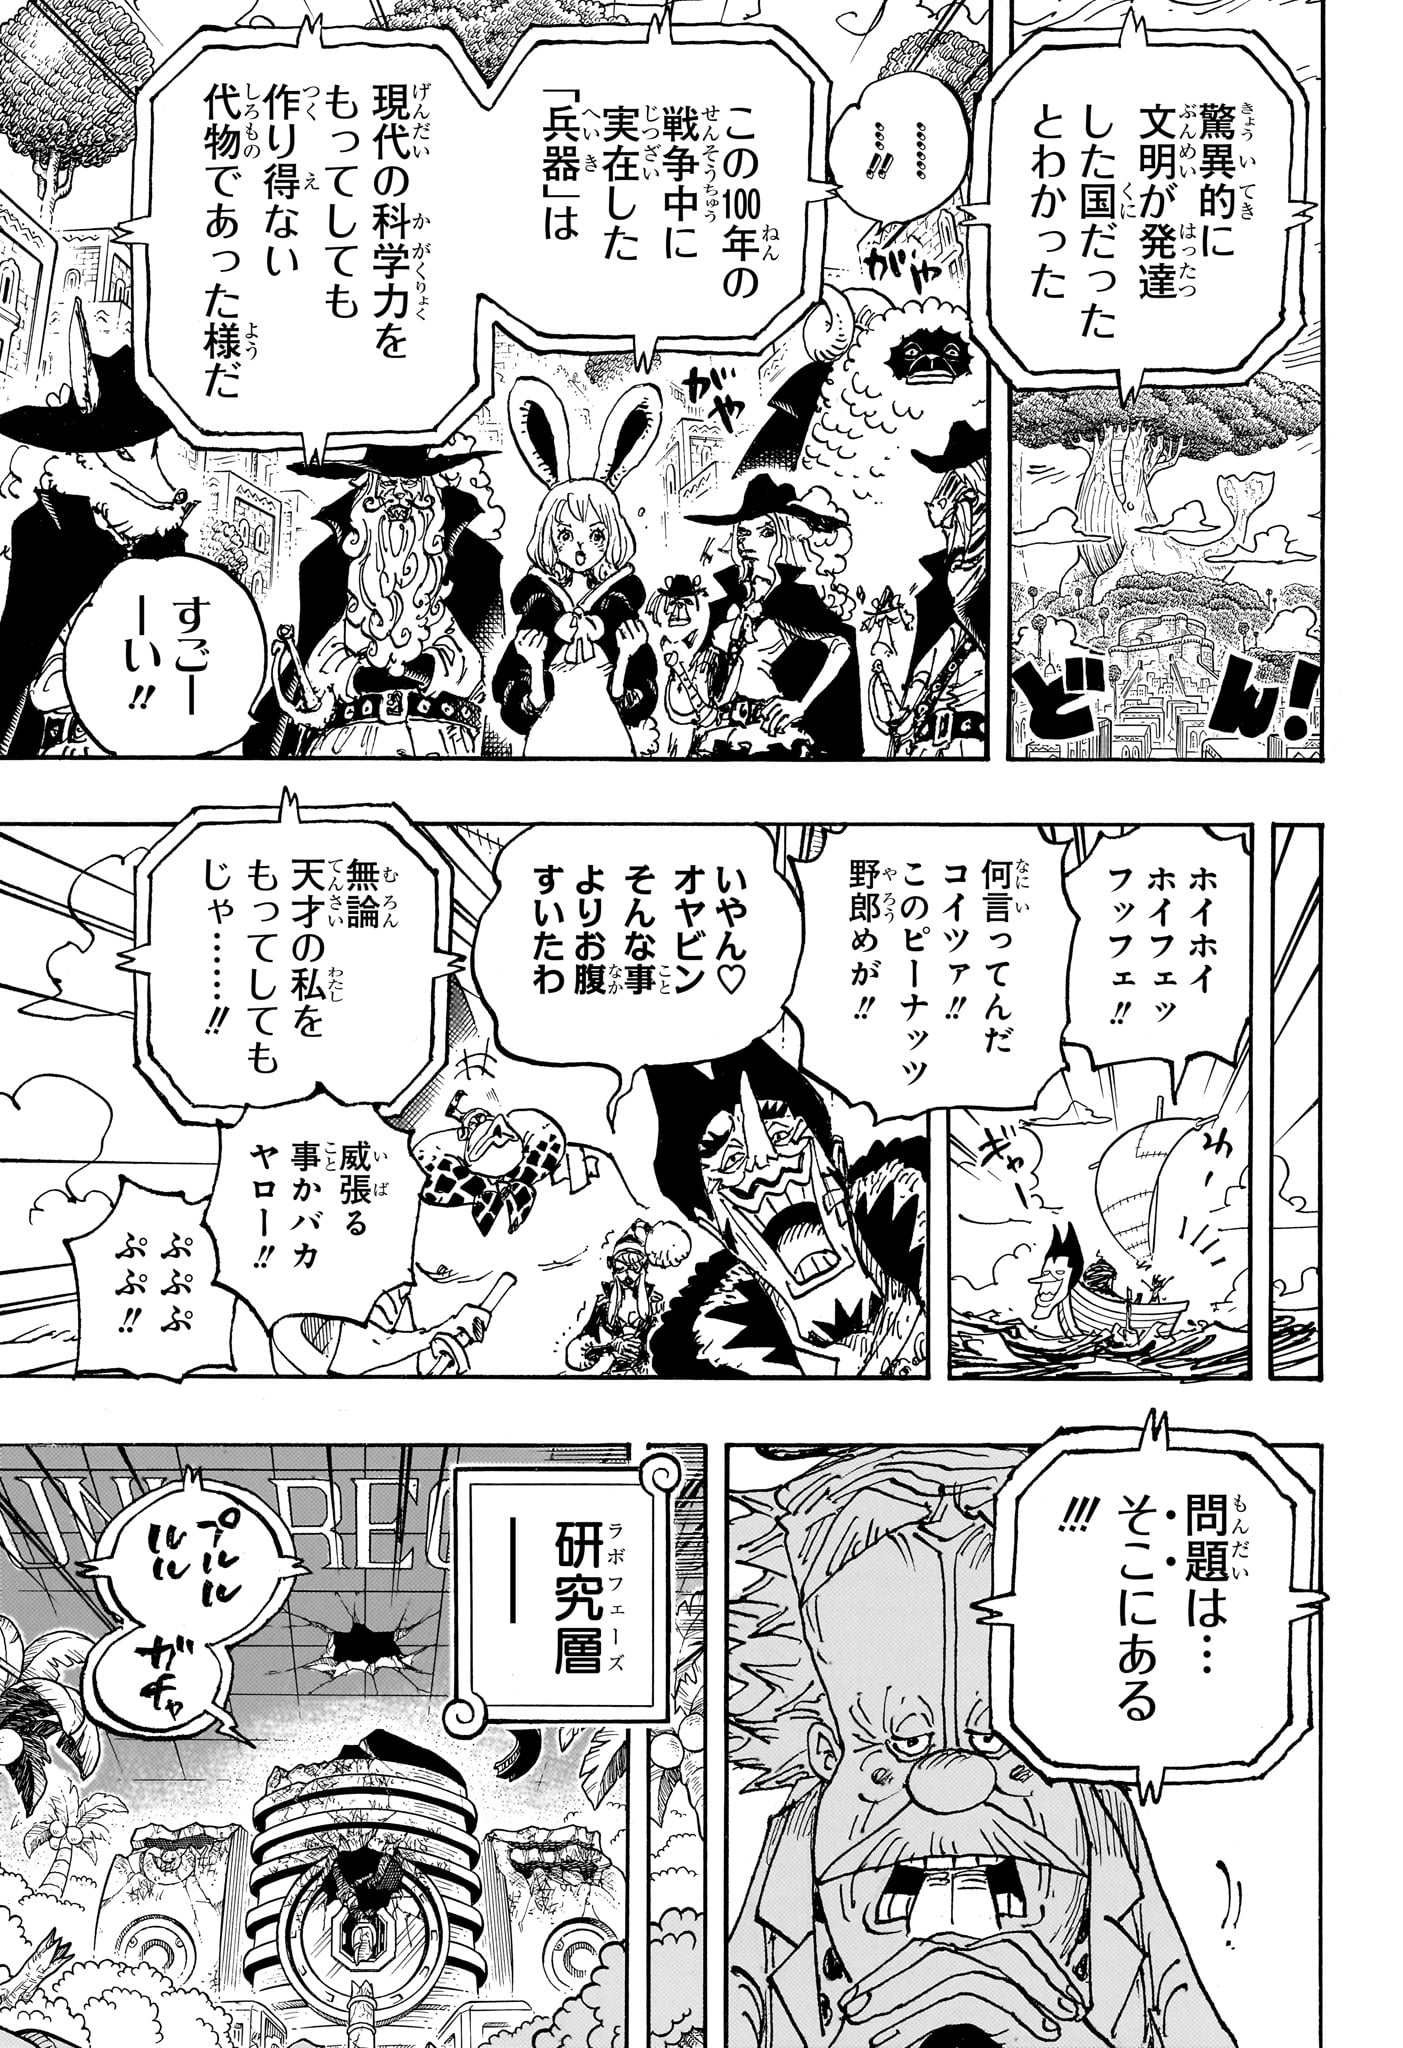 One Piece - Chapter 1115 - Page 5